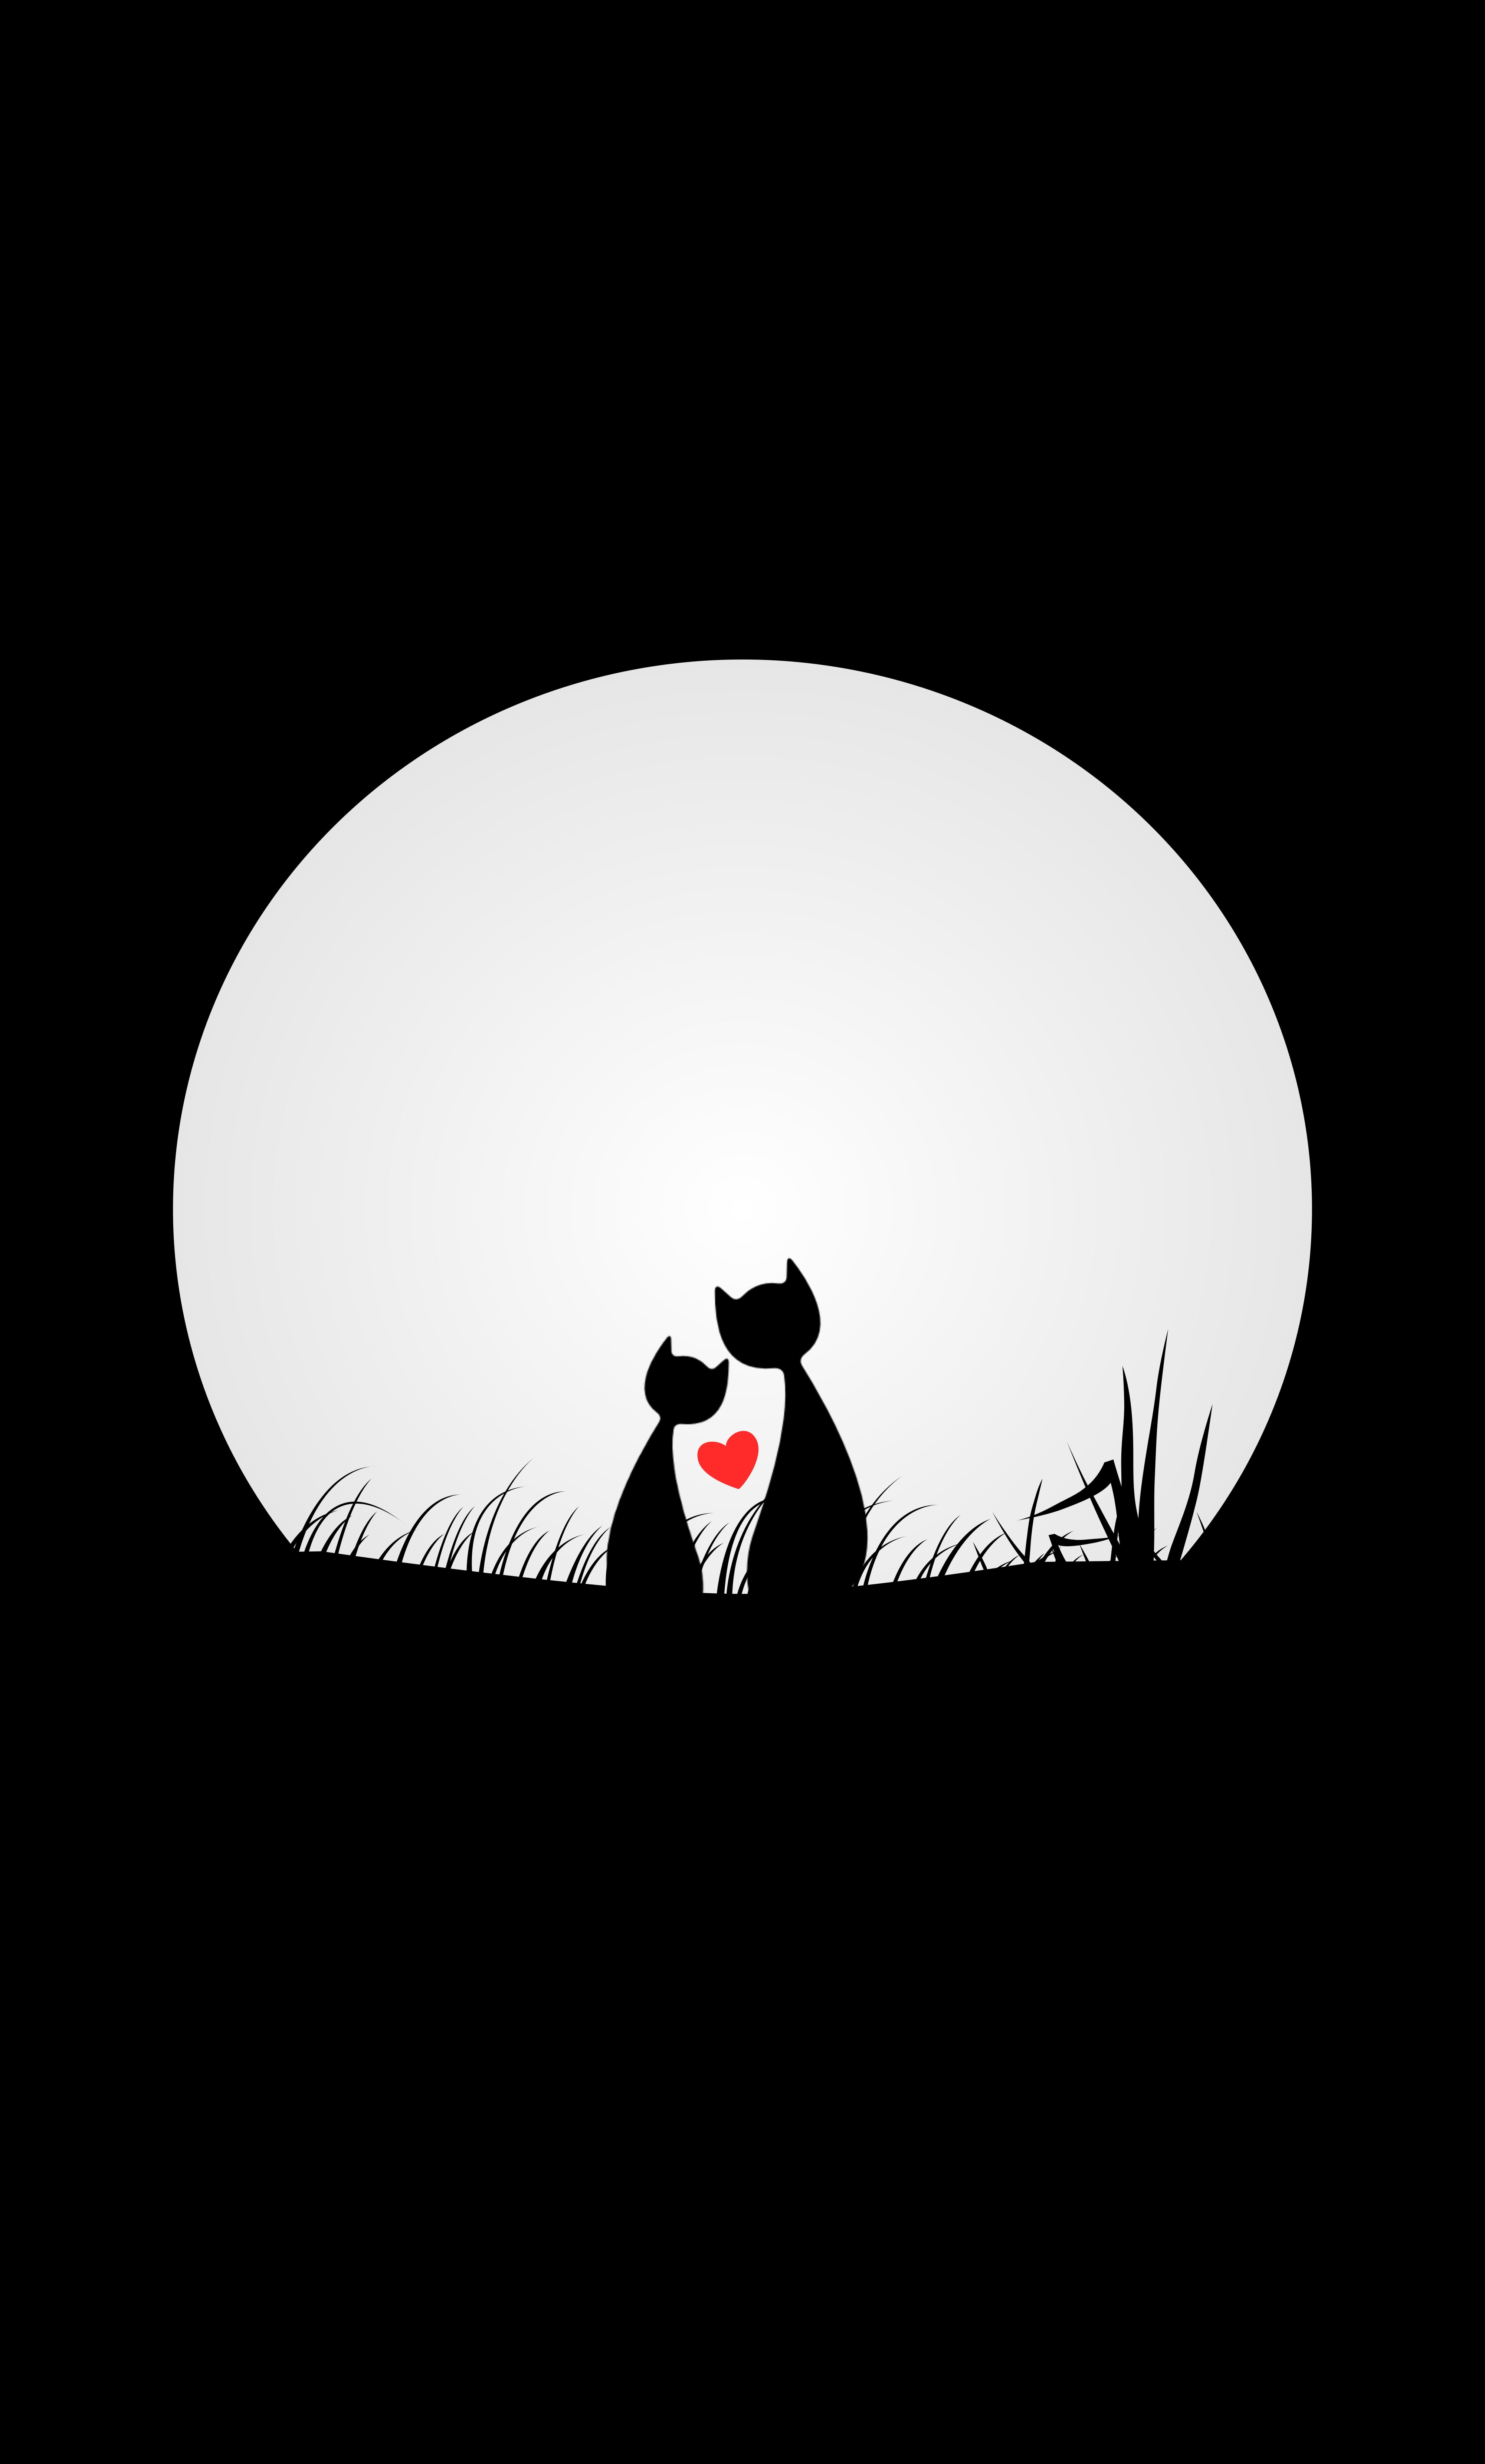 two black cat wallpaper, cats, love, silhouettes, night, moon